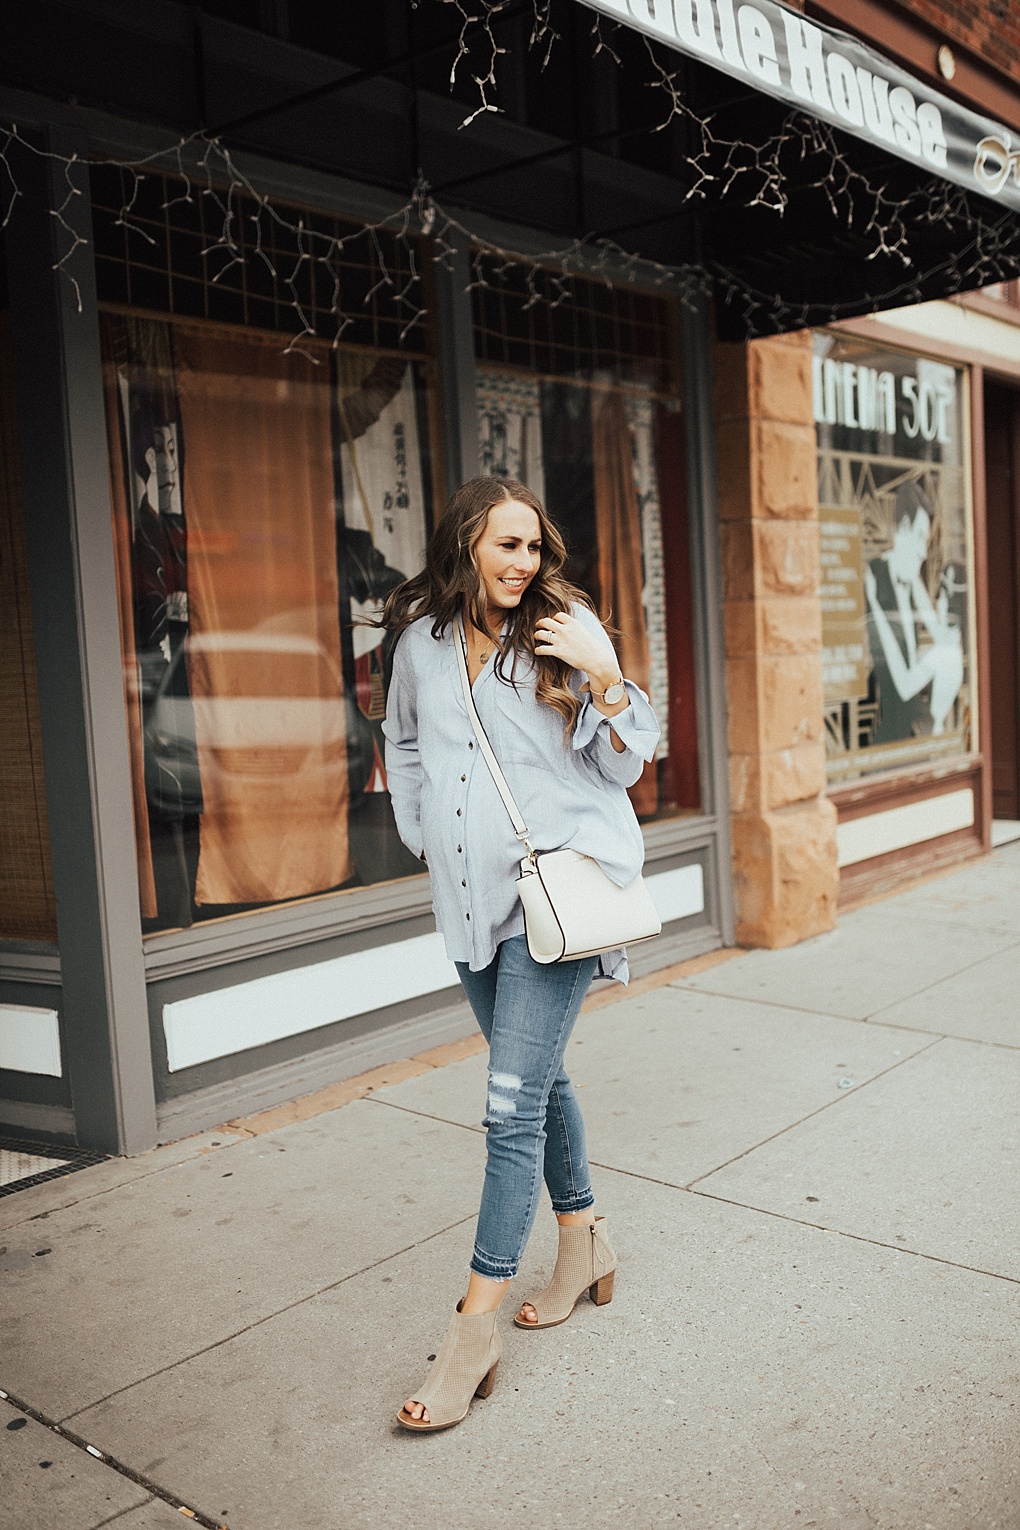 Bookmark this post ASAP! Utah Style Blogger Dani Marie shares her top tips how to wear this springs color trends!